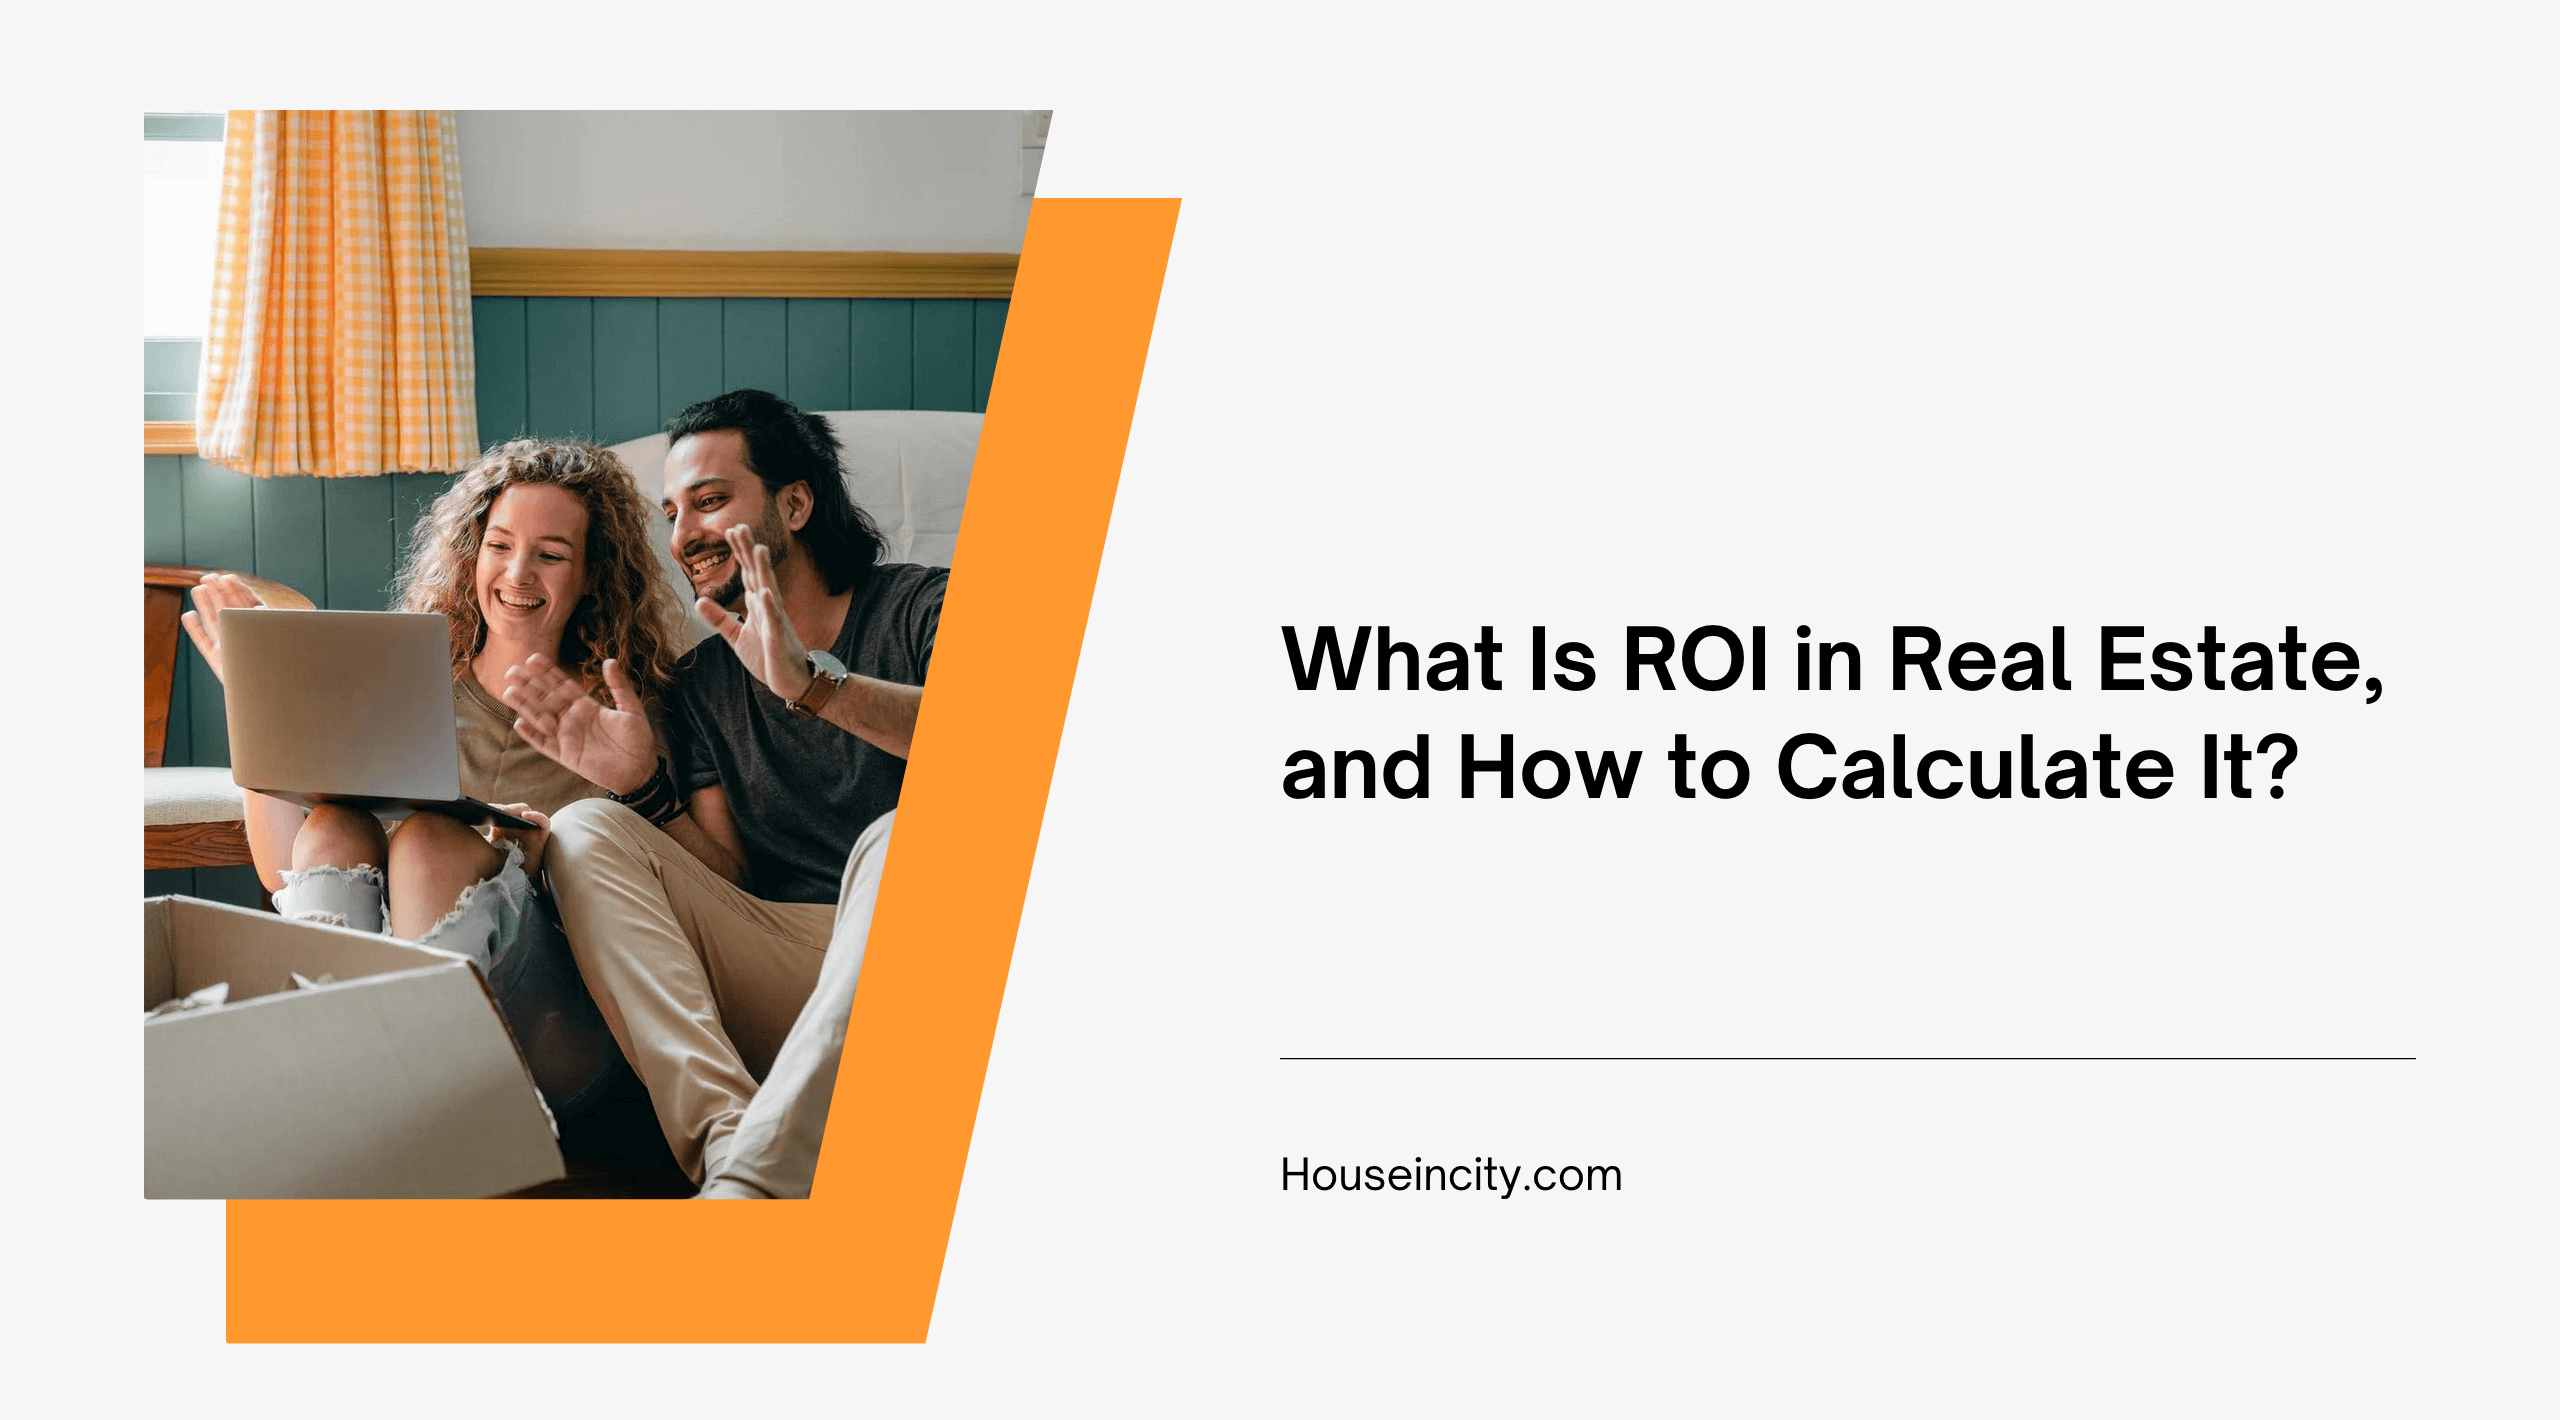 What Is ROI in Real Estate, and How to Calculate It?